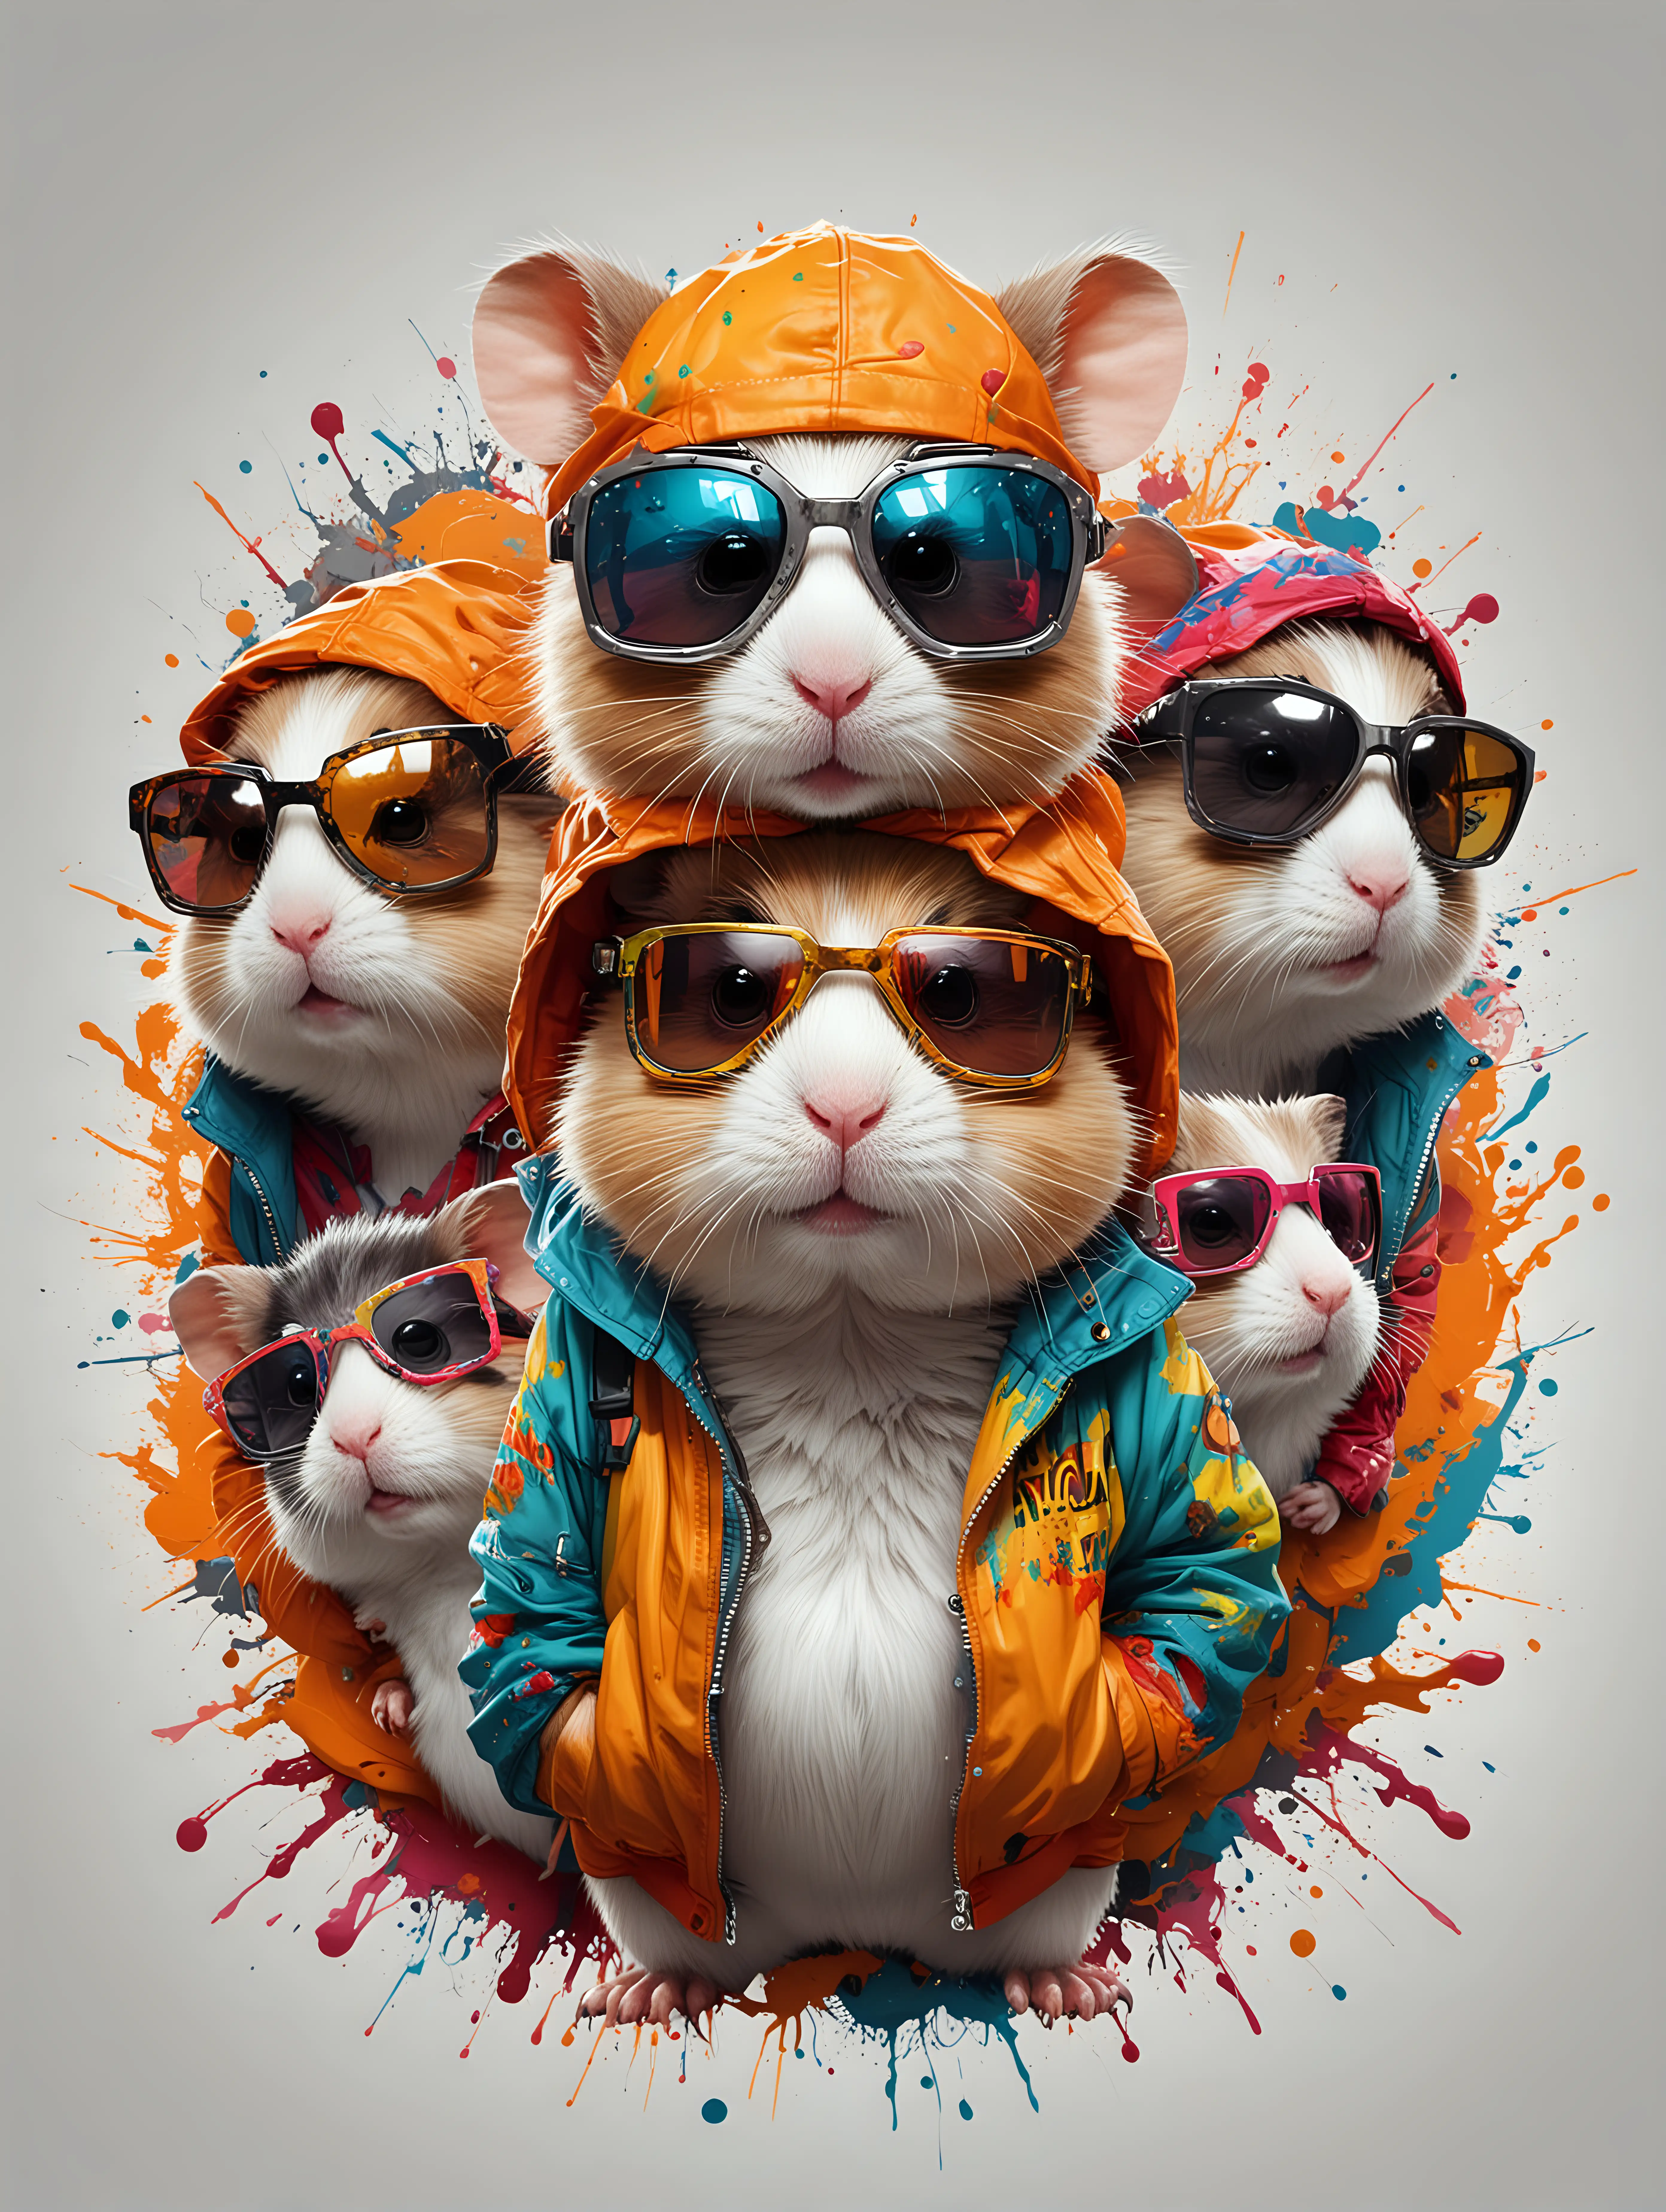 Colorful Graffiti Cartoon of a Hip Hop Hamster Family in a Luxury Setting